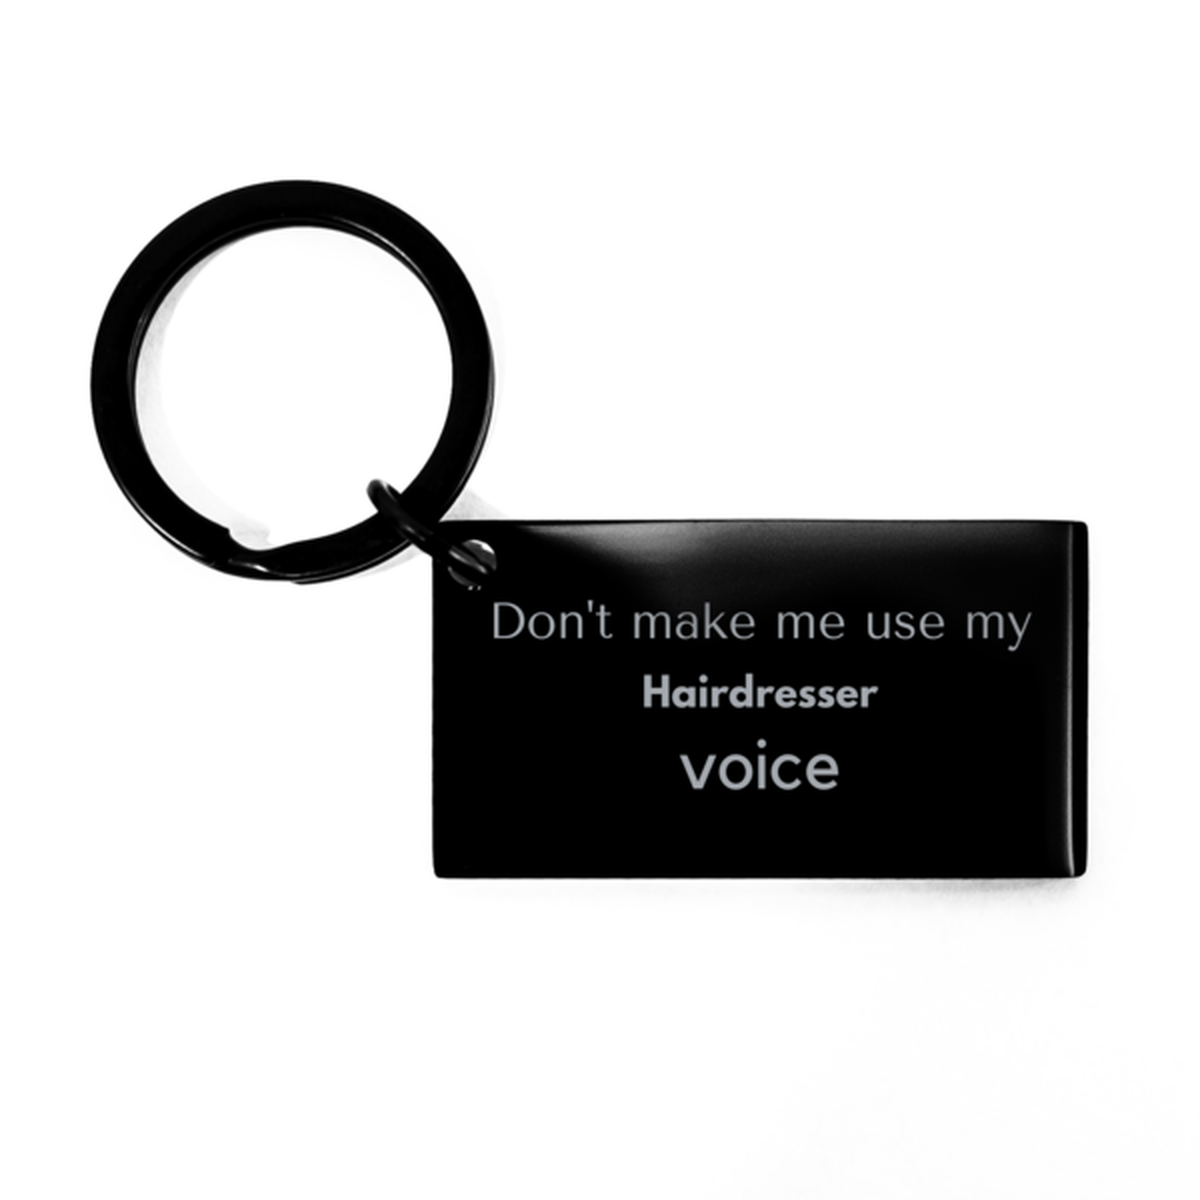 Don't make me use my Hairdresser voice, Sarcasm Hairdresser Gifts, Christmas Hairdresser Keychain Birthday Unique Gifts For Hairdresser Coworkers, Men, Women, Colleague, Friends